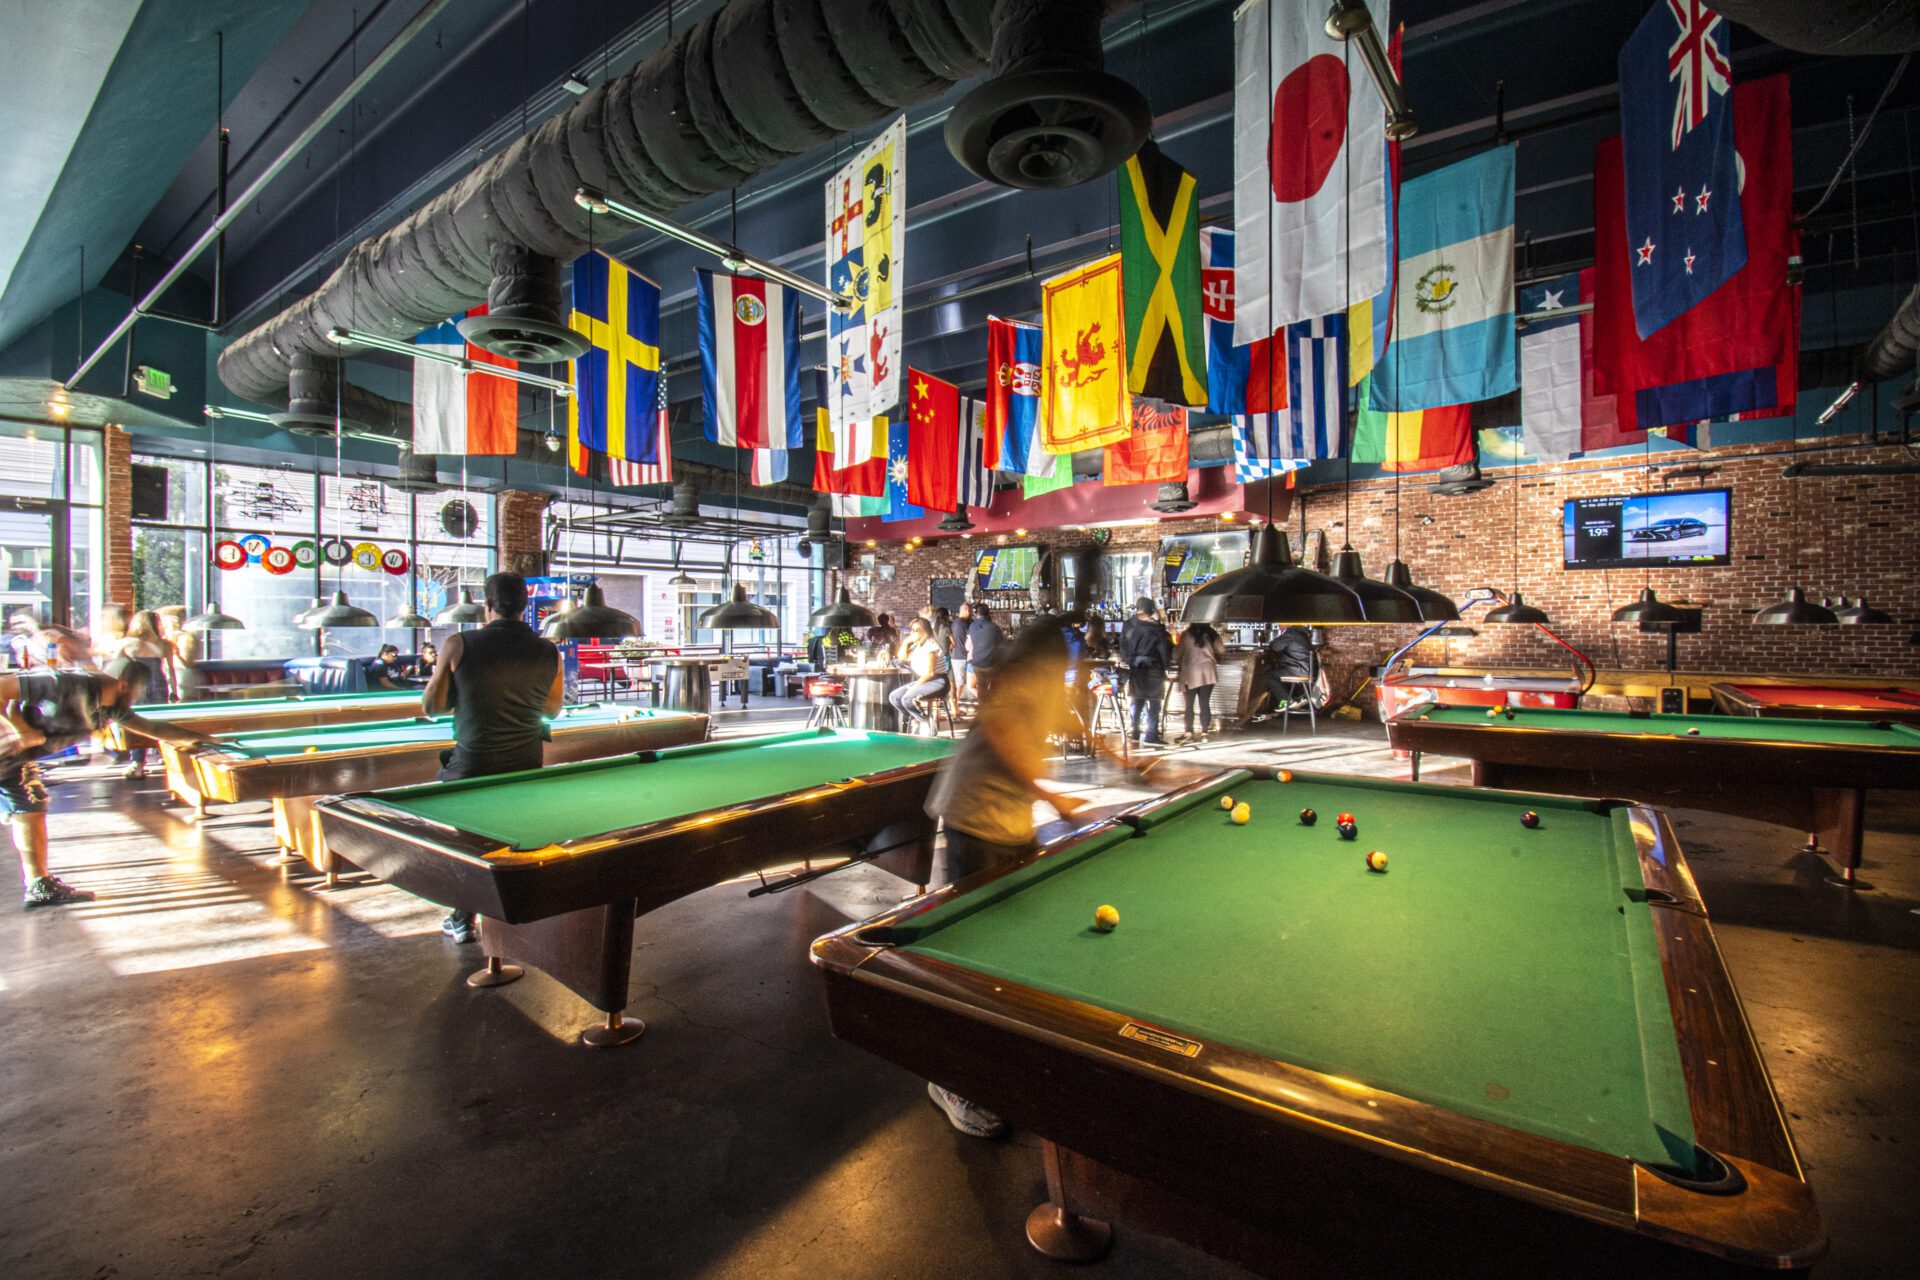 bar pool tables and country flags